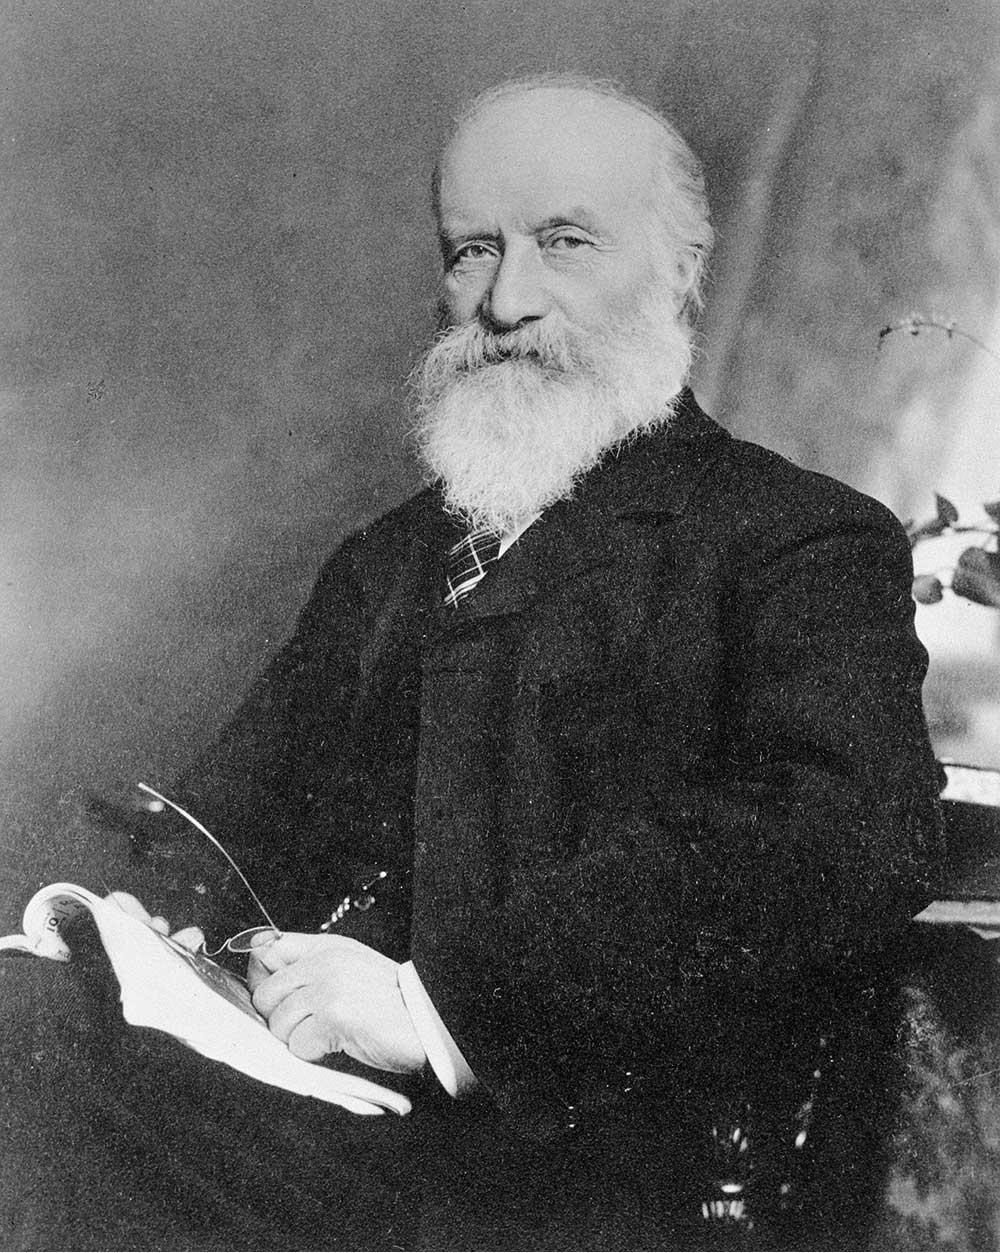 Black and white portrait photo of Sandford Fleming holding his glasses and a book.